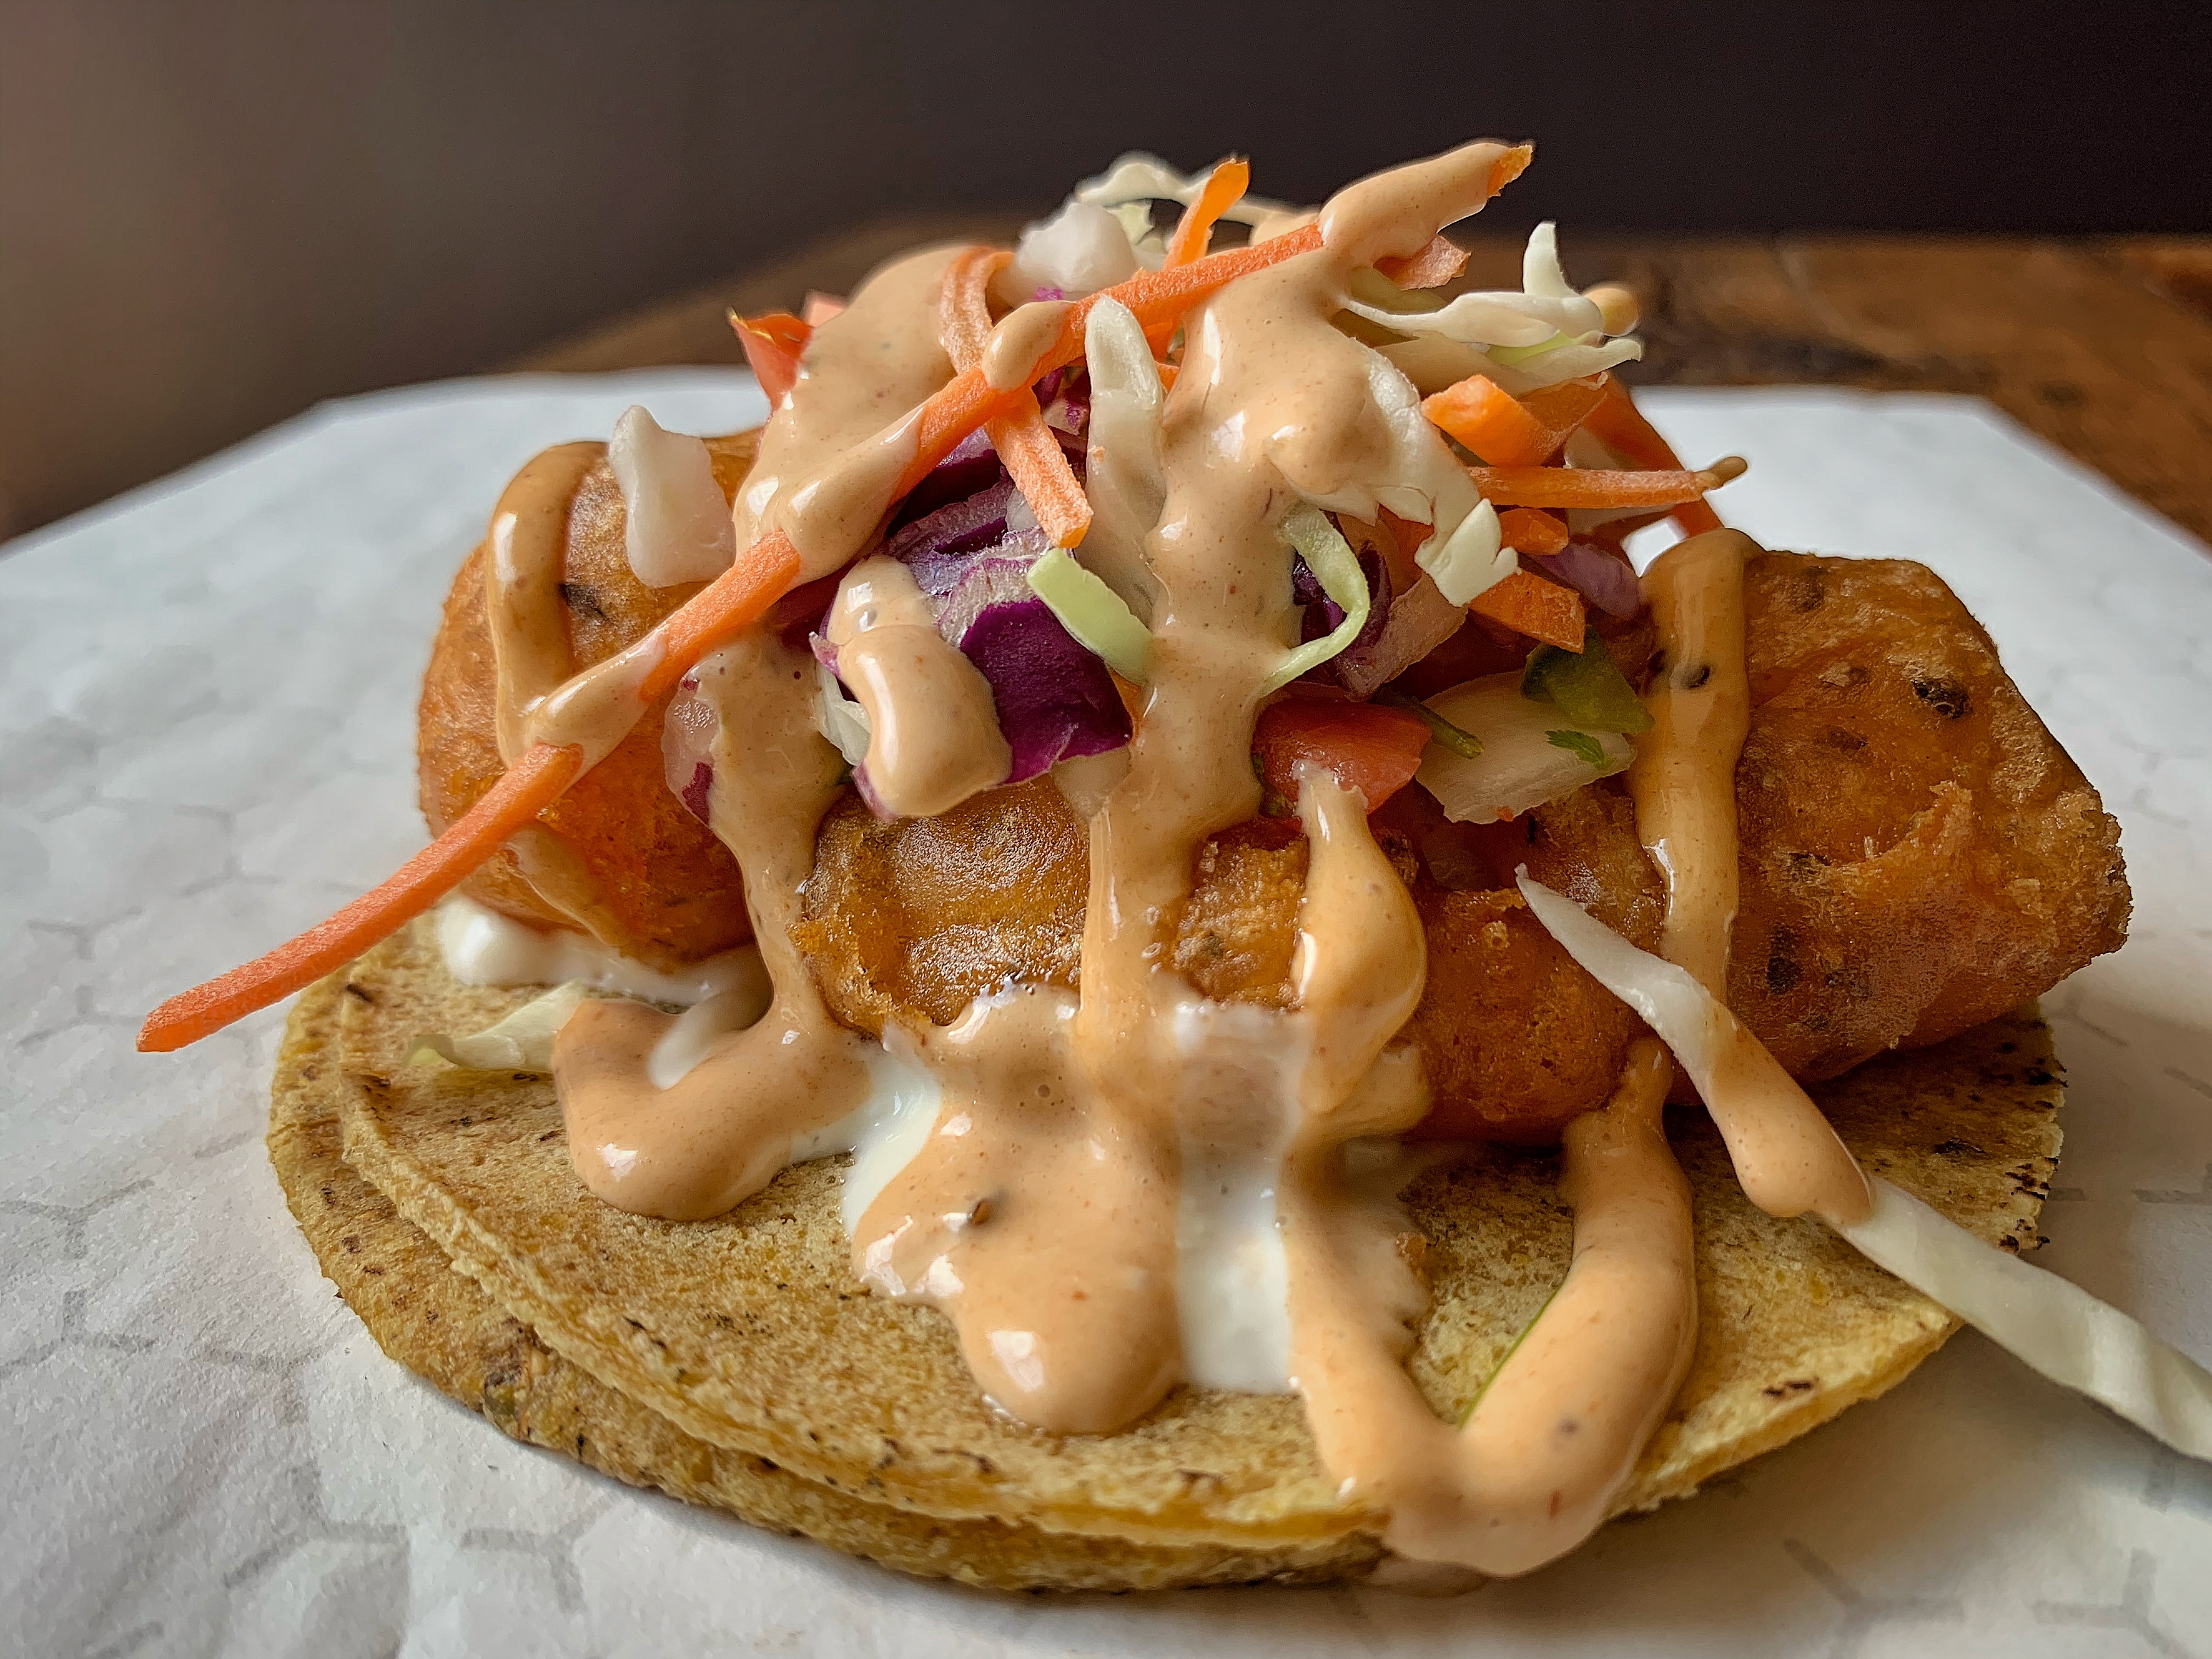 Closeup of a taco with fried fish, slaw, crema, and a drizzle of a creamy orange sauce